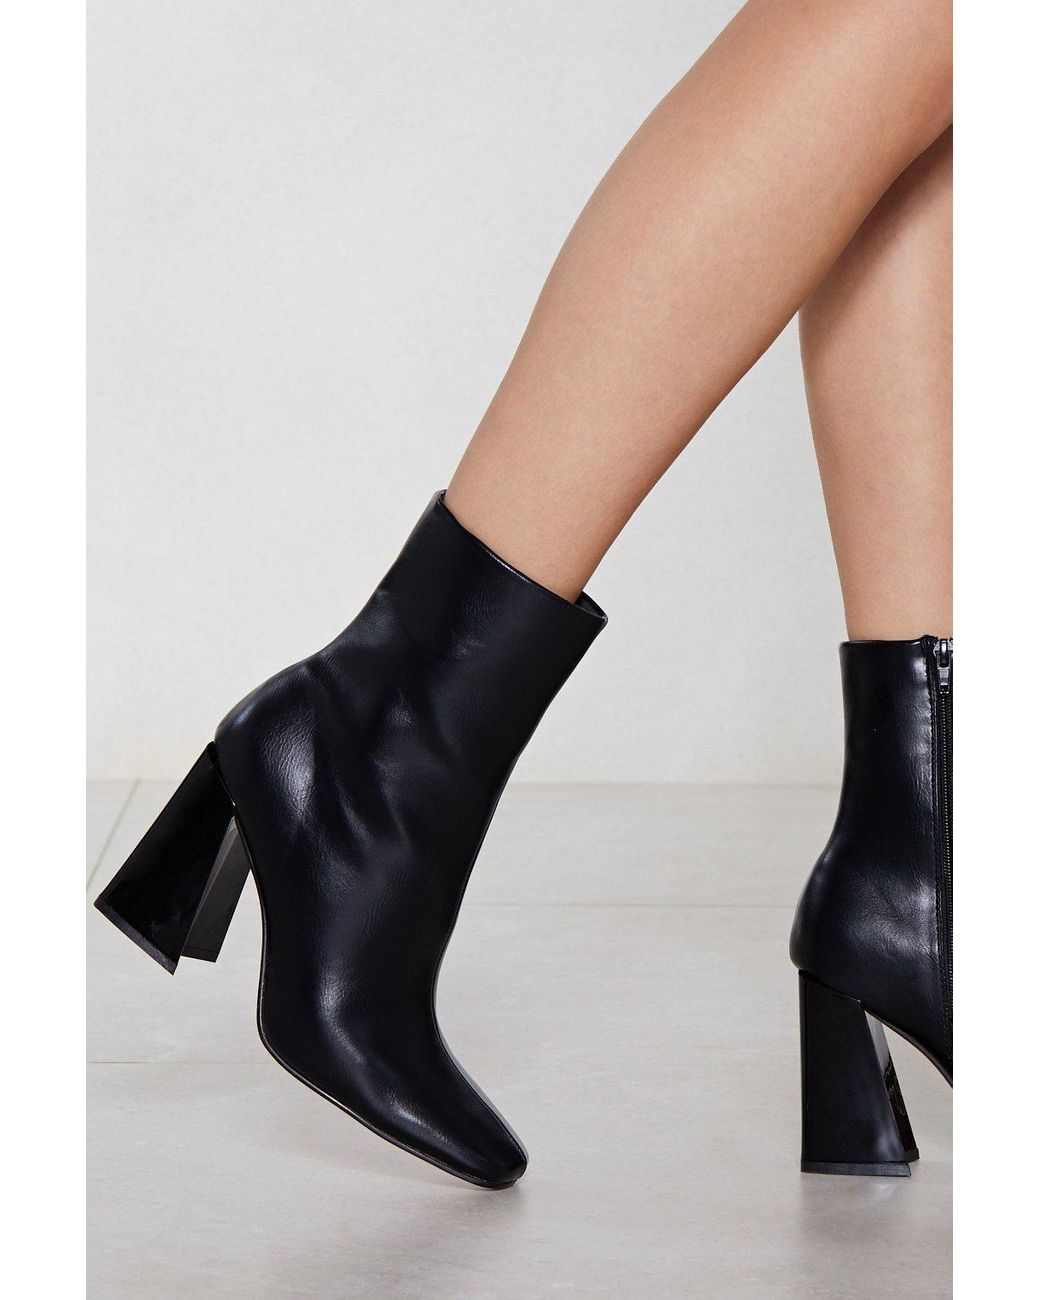 Nasty Gal Flared Block Heel High Ankle Boots in Black | Lyst